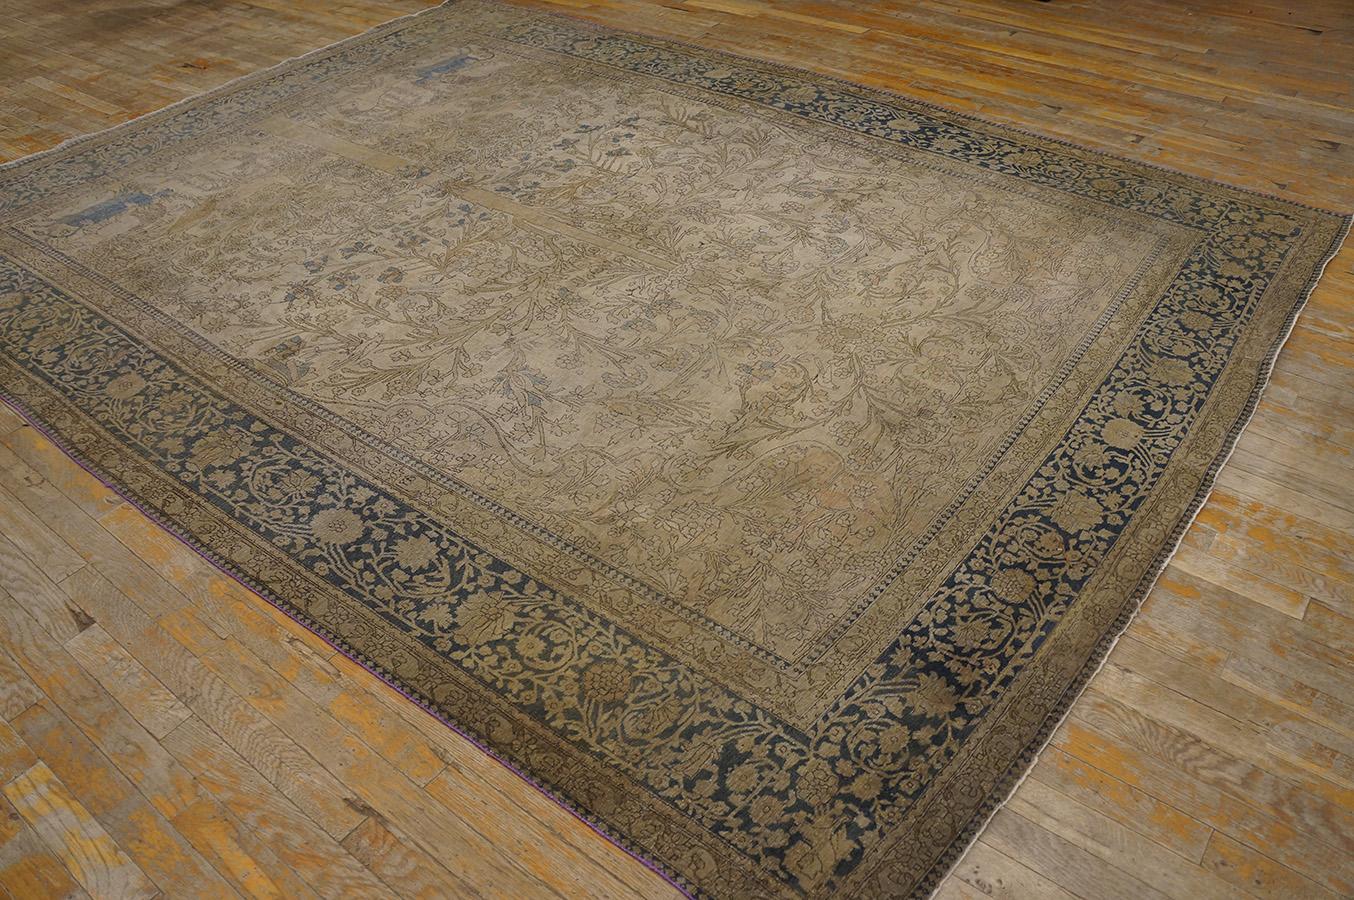 19th Century Persian Mohtasham Kashan Carpet ( 7' 7'' x 10' 3'' - 232 x 313 cm ) In Good Condition For Sale In New York, NY